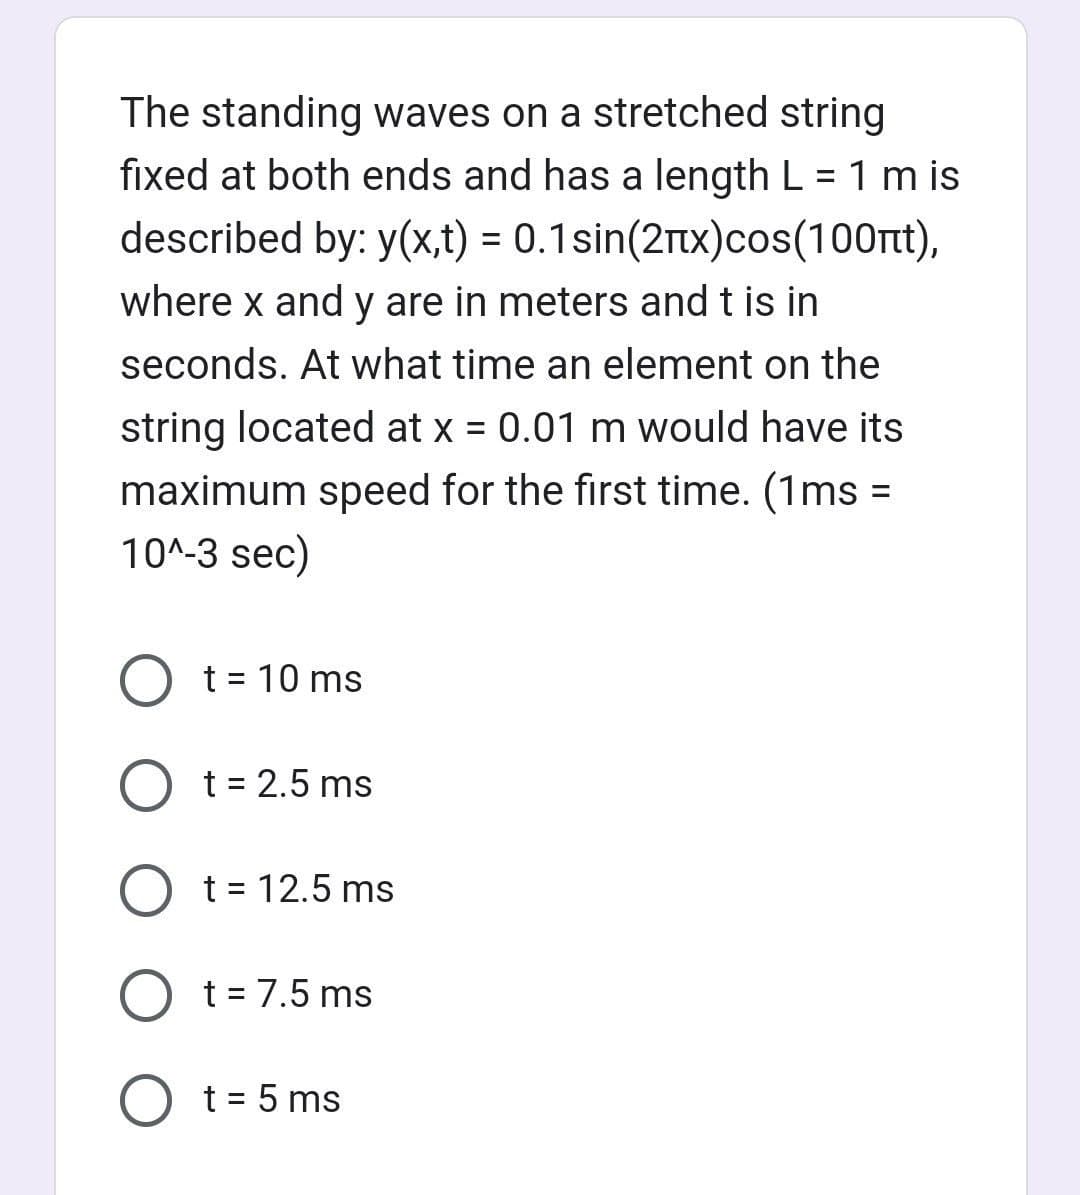 The standing waves on a stretched string
fixed at both ends and has a length L = 1 m is
described by: y(x,t) = 0.1sin(2x)cos(100nt),
where x and y are in meters and t is in
seconds. At what time an element on the
string located at x = 0.01 m would have its
maximum speed for the first time. (1ms =
10^-3 sec)
O t = 10 ms
O t = 2.5 ms
O t = 12.5 ms
O t = 7.5 ms
O t = 5 ms